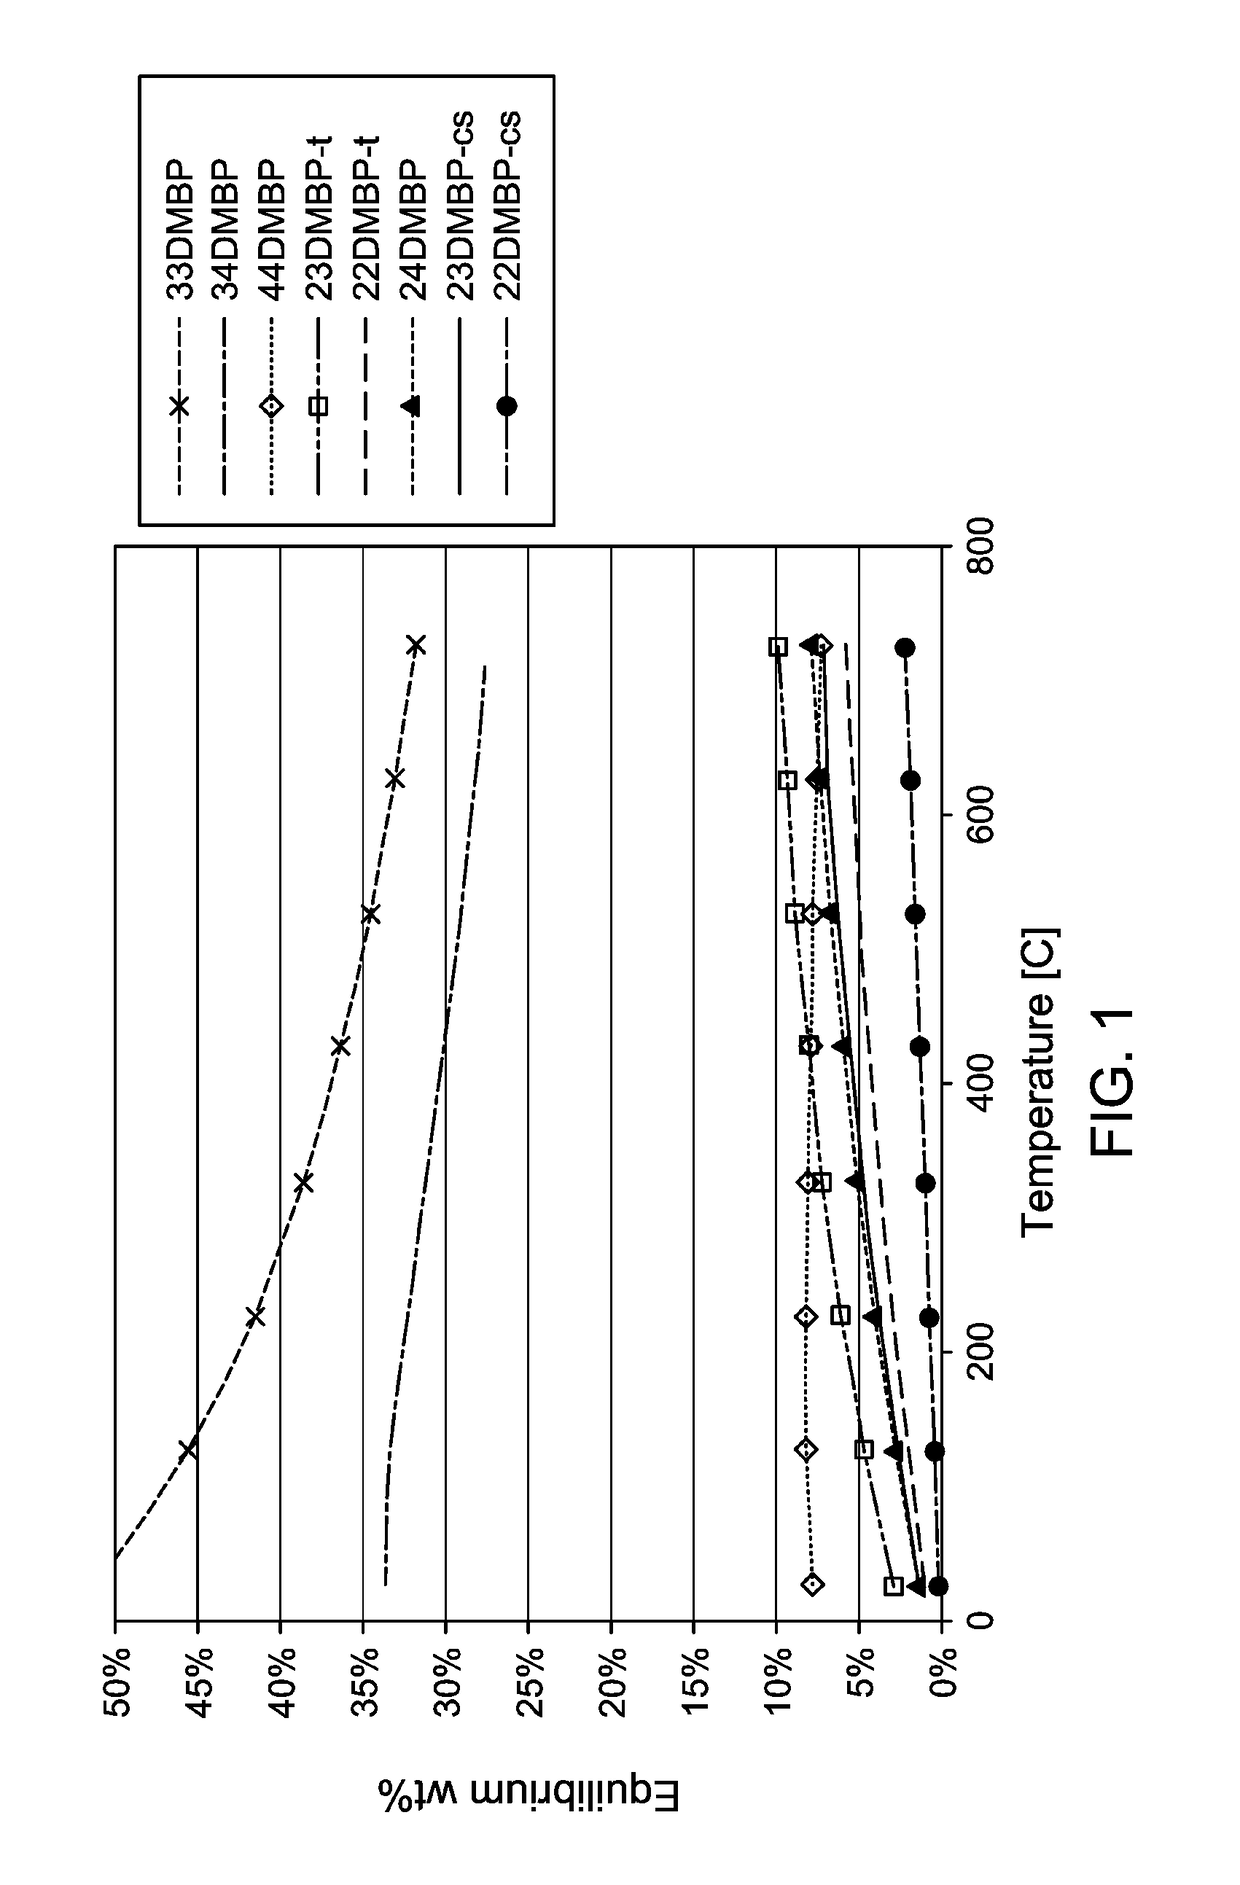 Production and use of dialkylbiphenyl isomer mixtures